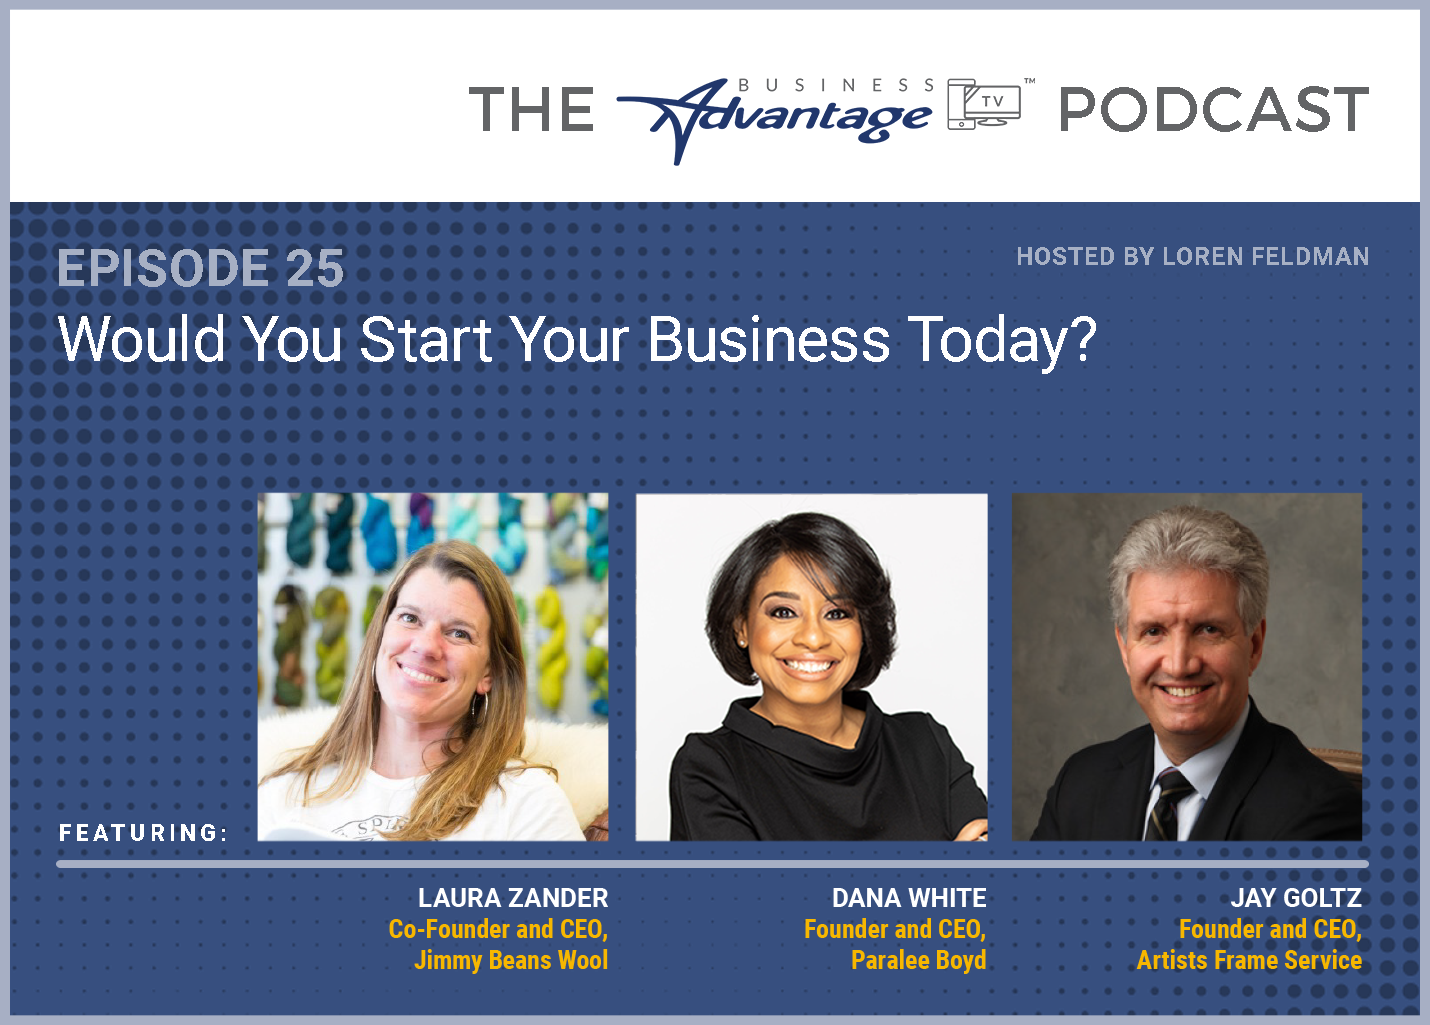 Episode 25: Would You Start Your Business Today?